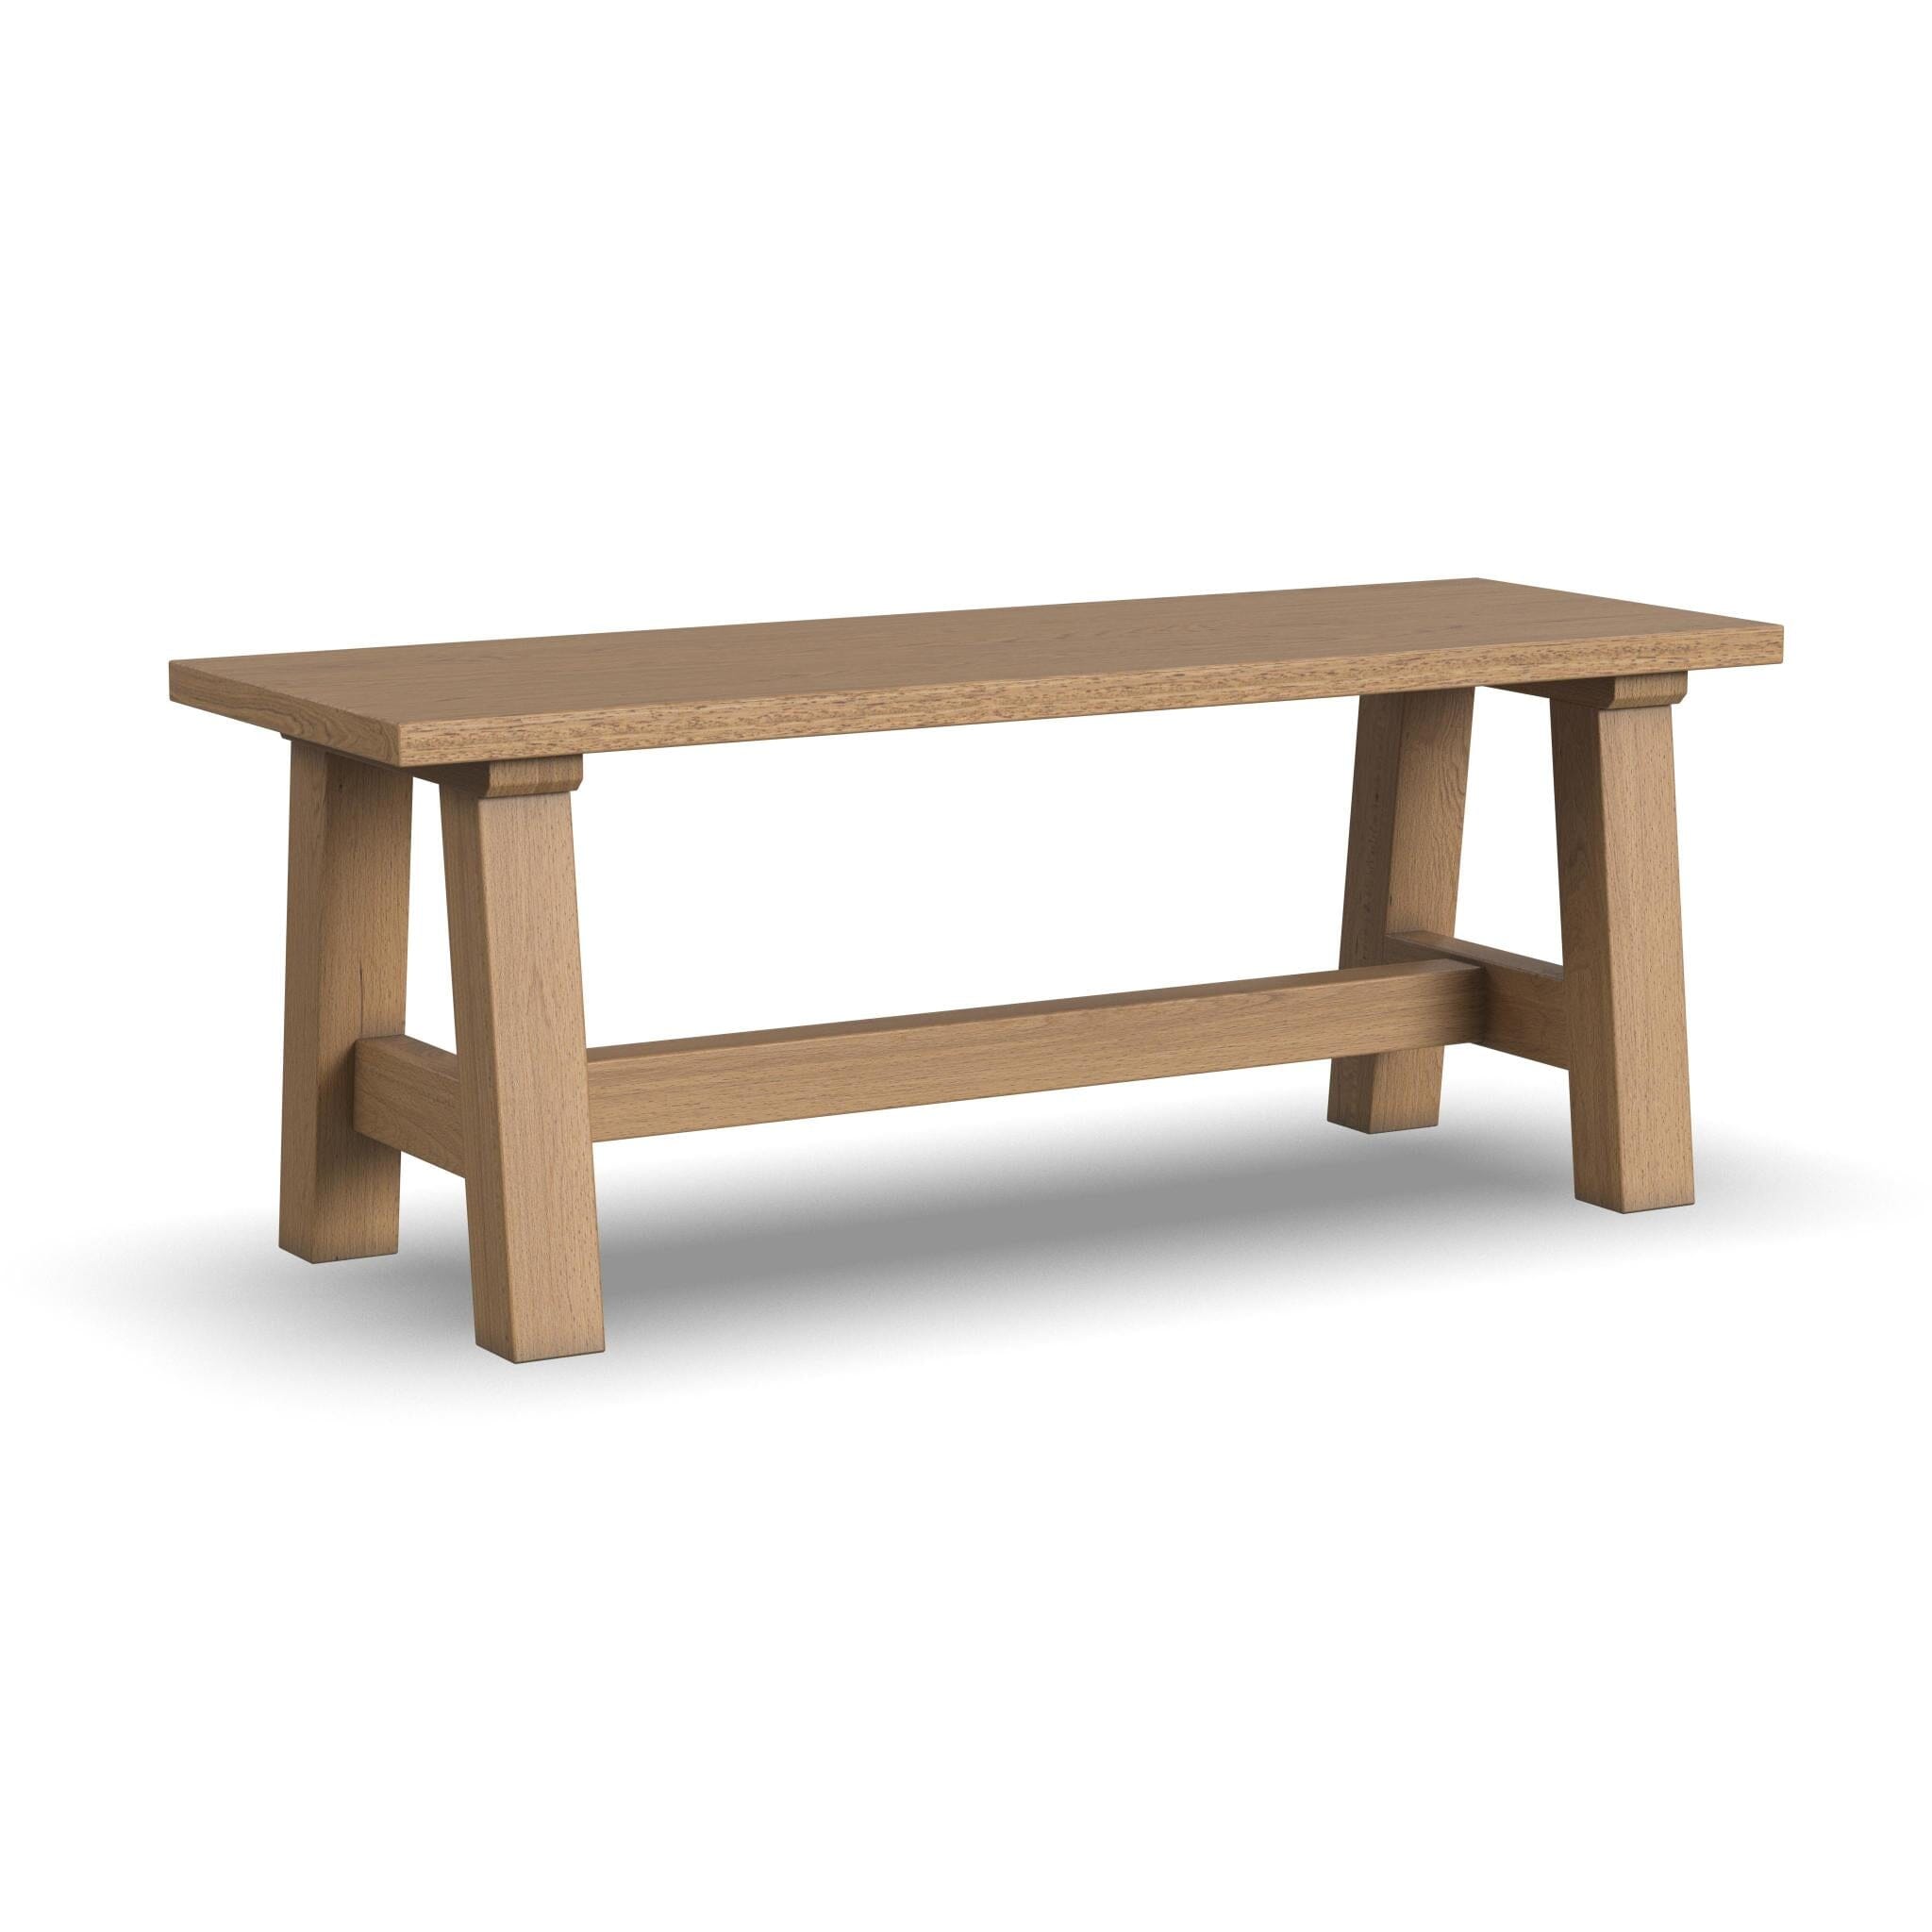 Rustic Farmhouse Dining Bench By Trestle Dining Bench Trestle